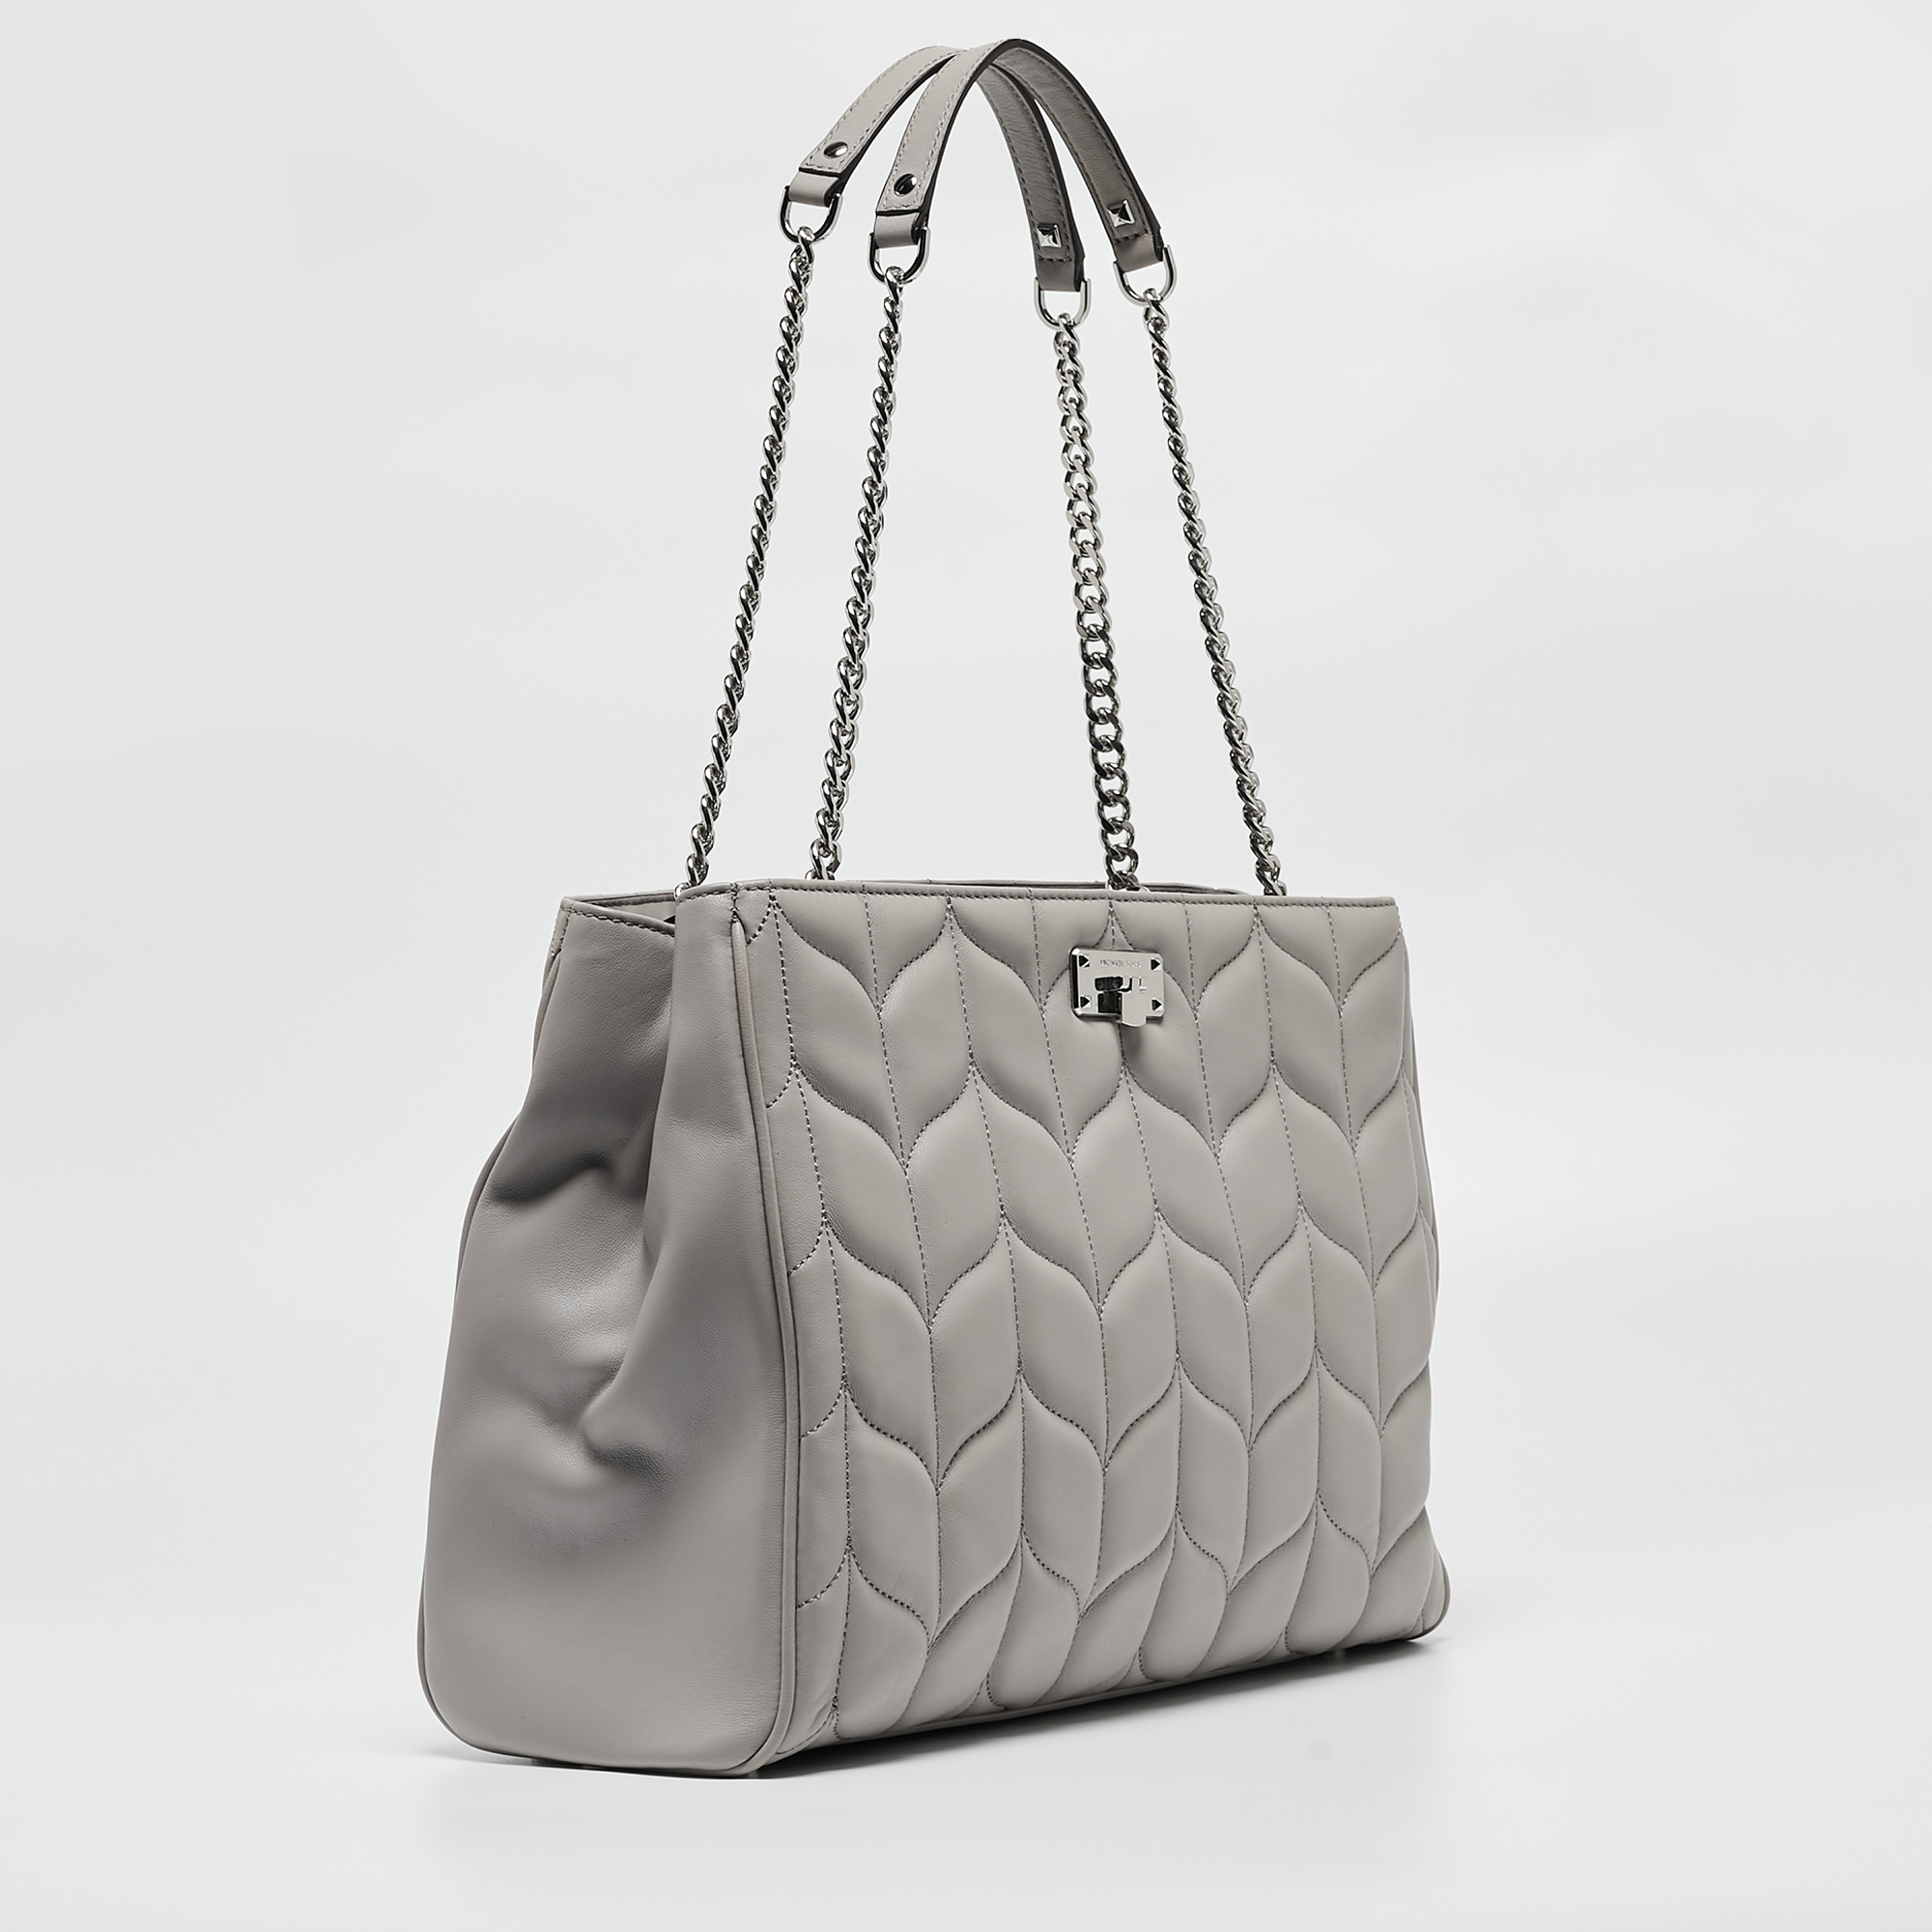 Michael Kors Grey Quilted Leather Peyton Large Convertible Tote